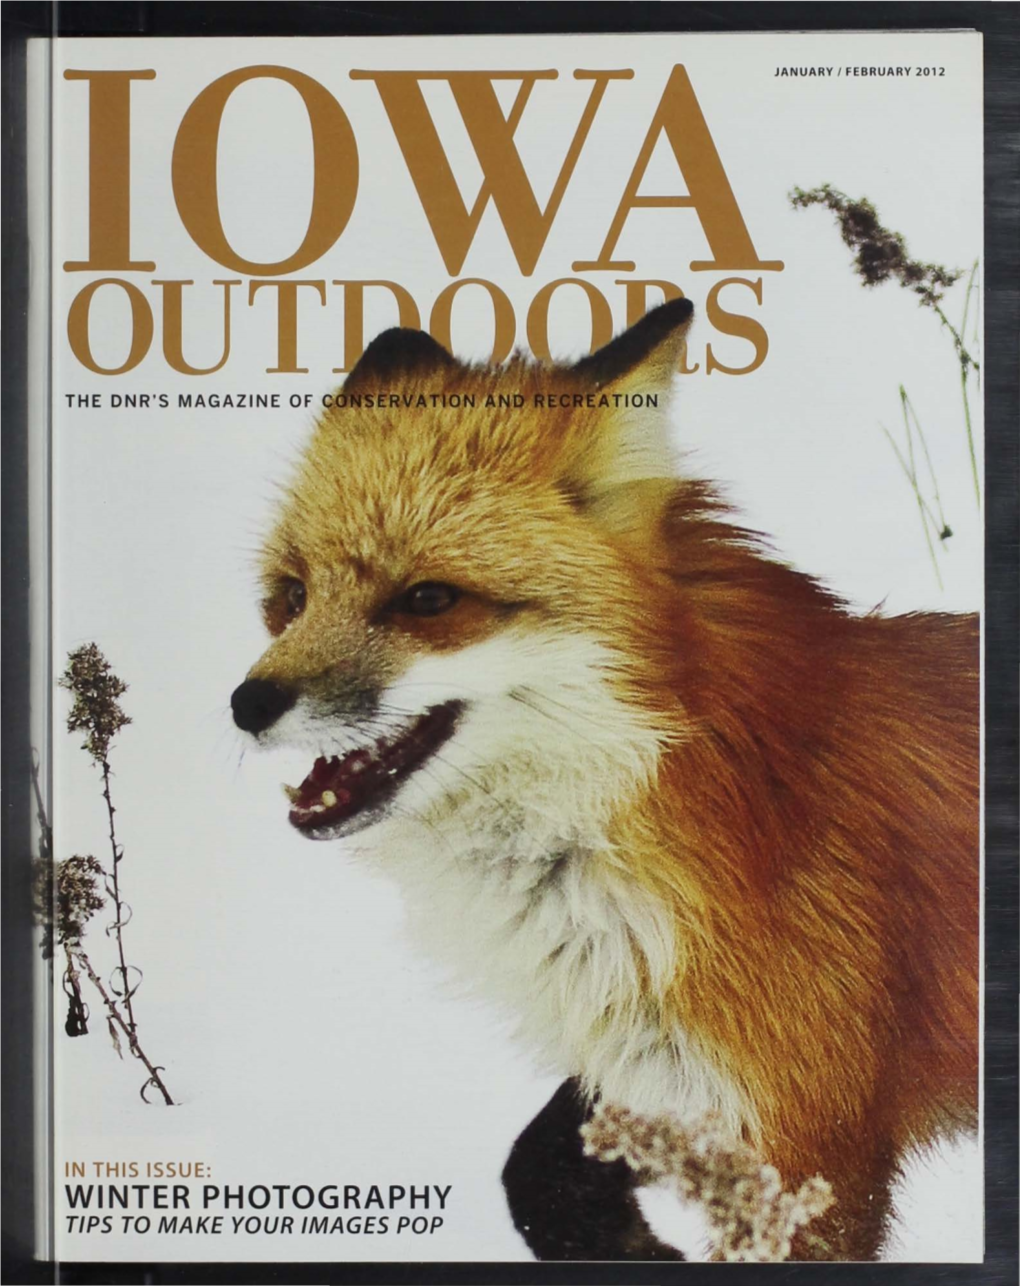 WINTER PHOTOGRAPHY TIPS to MAKE YOUR IMAGES POP STATE LIBRARY OP IOWA 1111 E Grand•· D£~ Lt\QIMES, La 50319